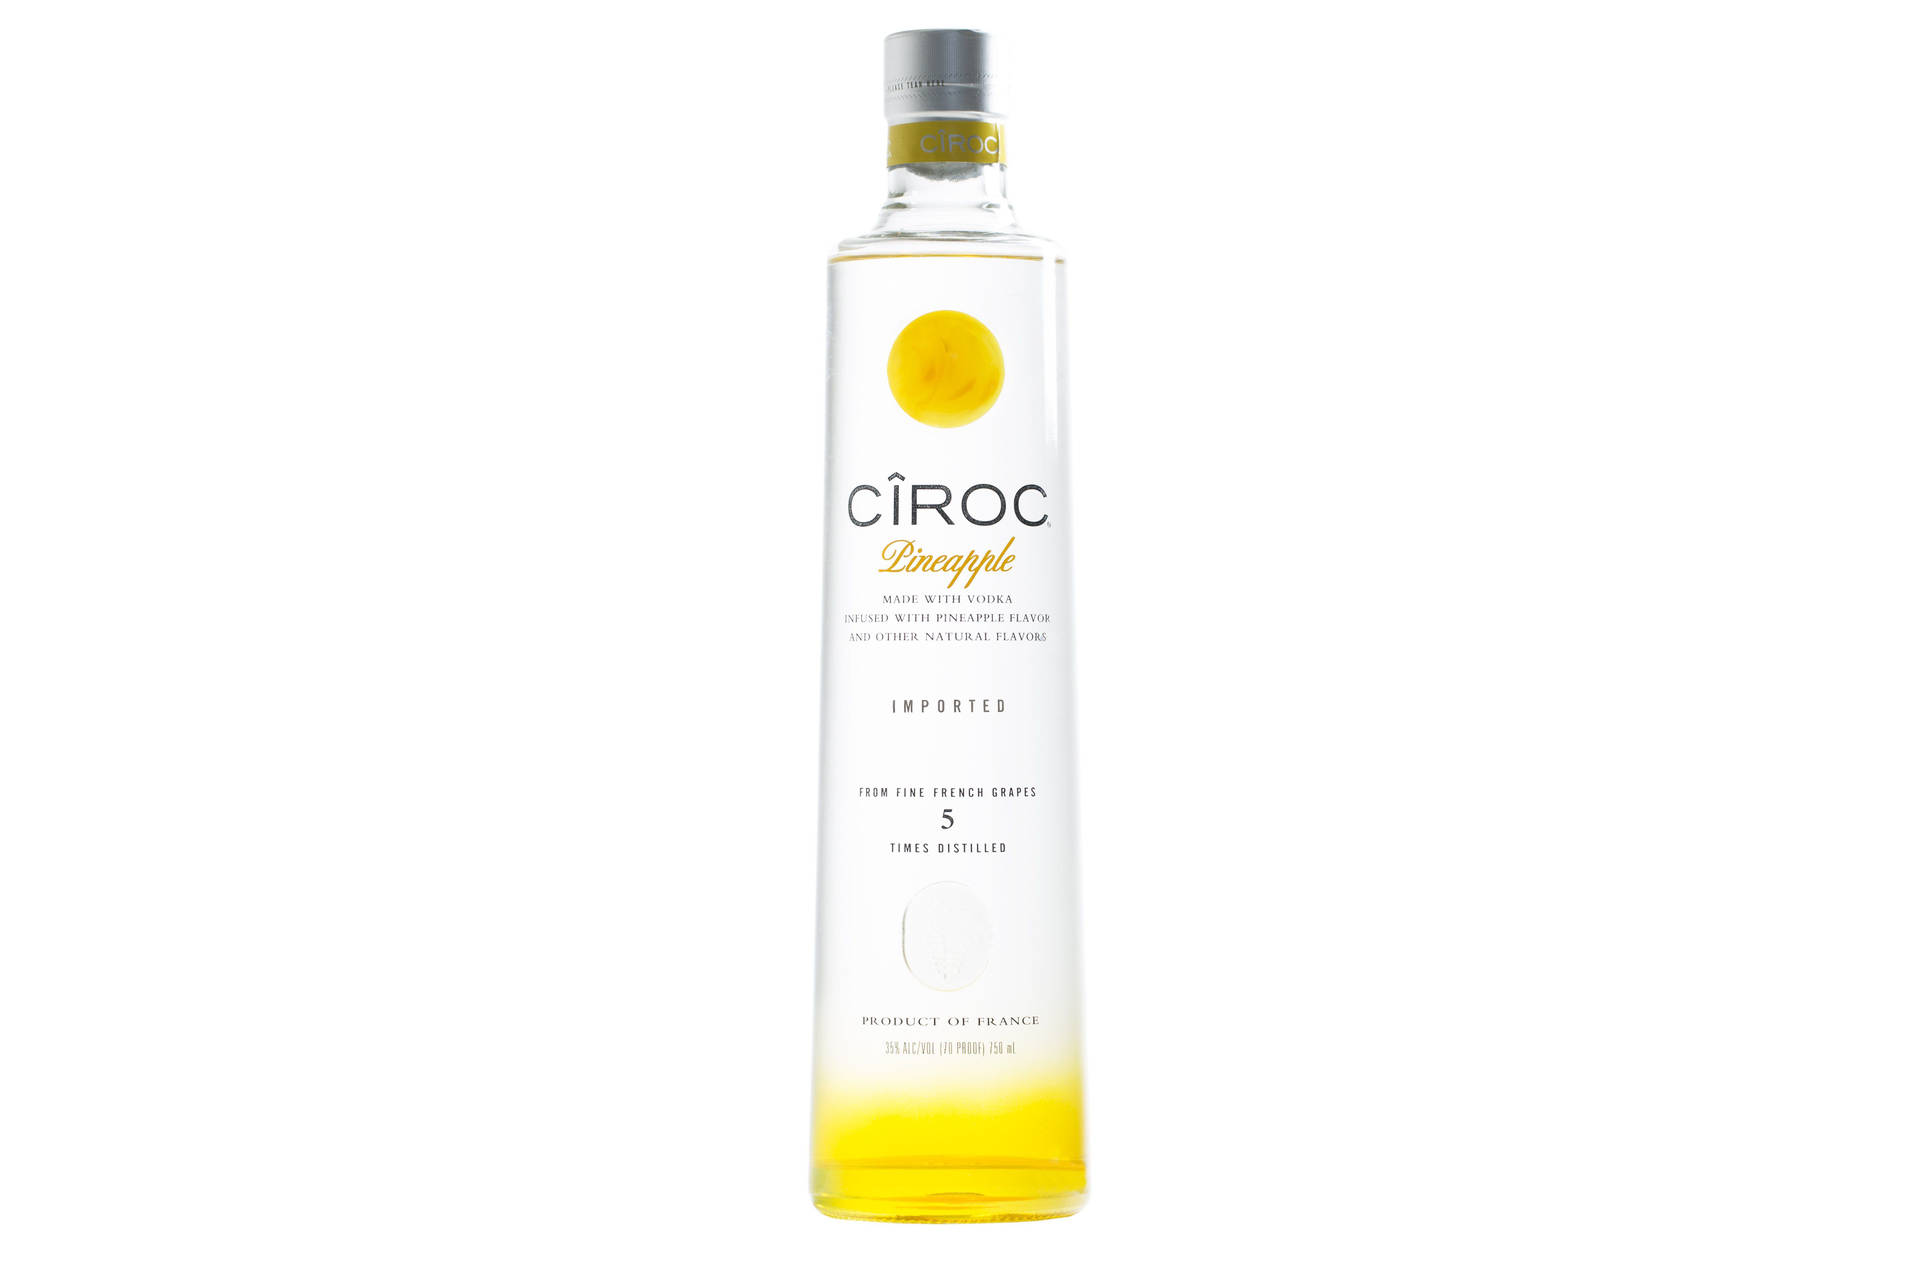 Caption: Experience the Fine Blend of Ciroc French Vodka in Luscious Pineapple Flavor Wallpaper